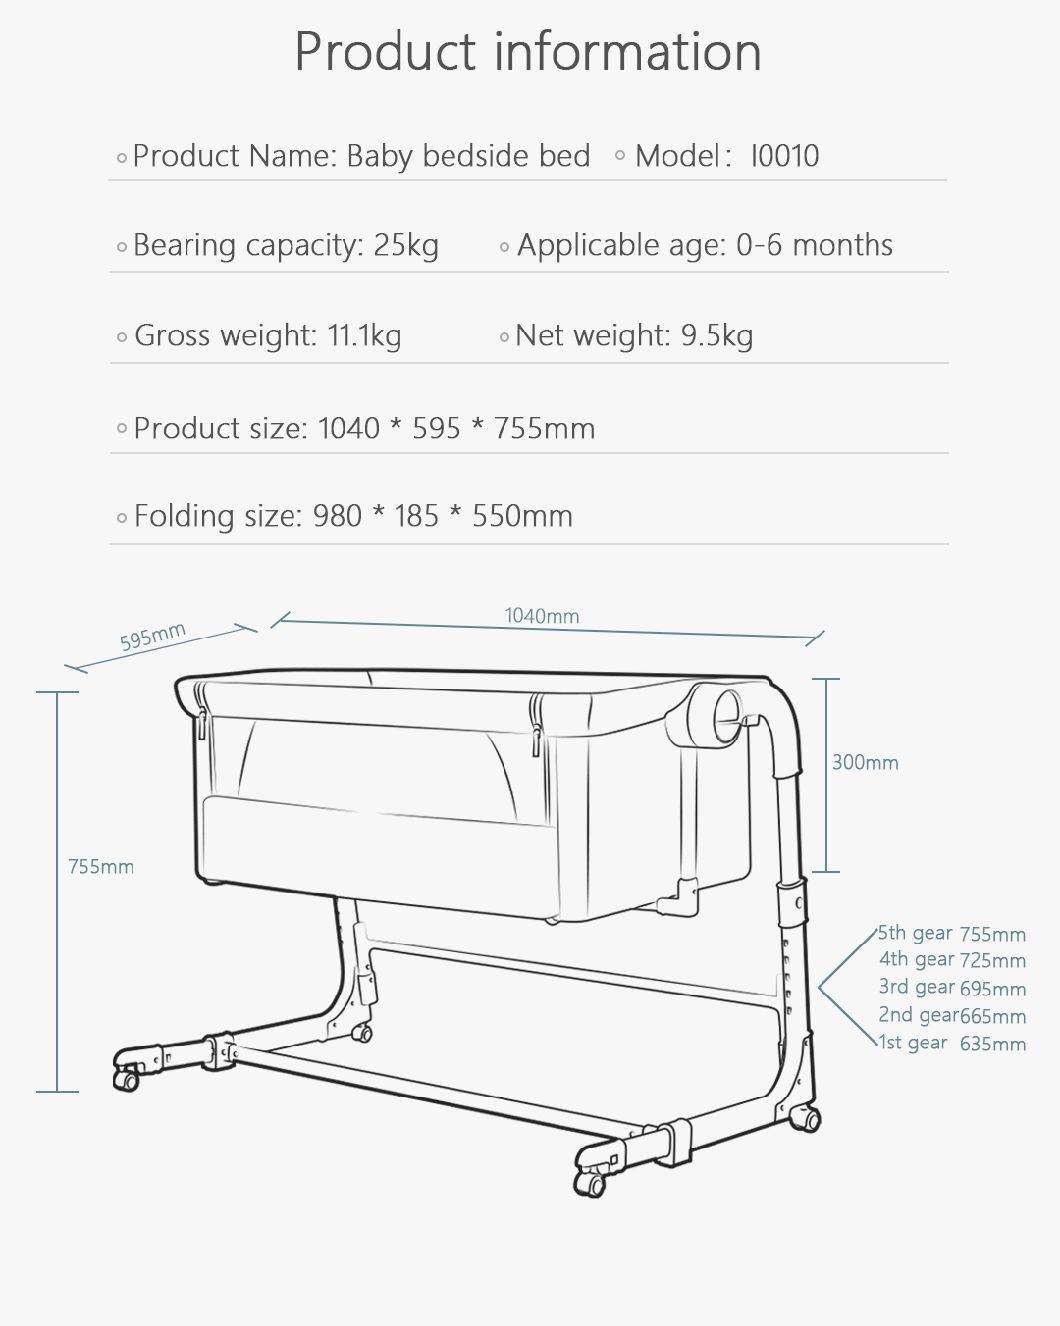 China Wholesale Folding Crib Cot Baby Bed with Mature Manufacturing Process